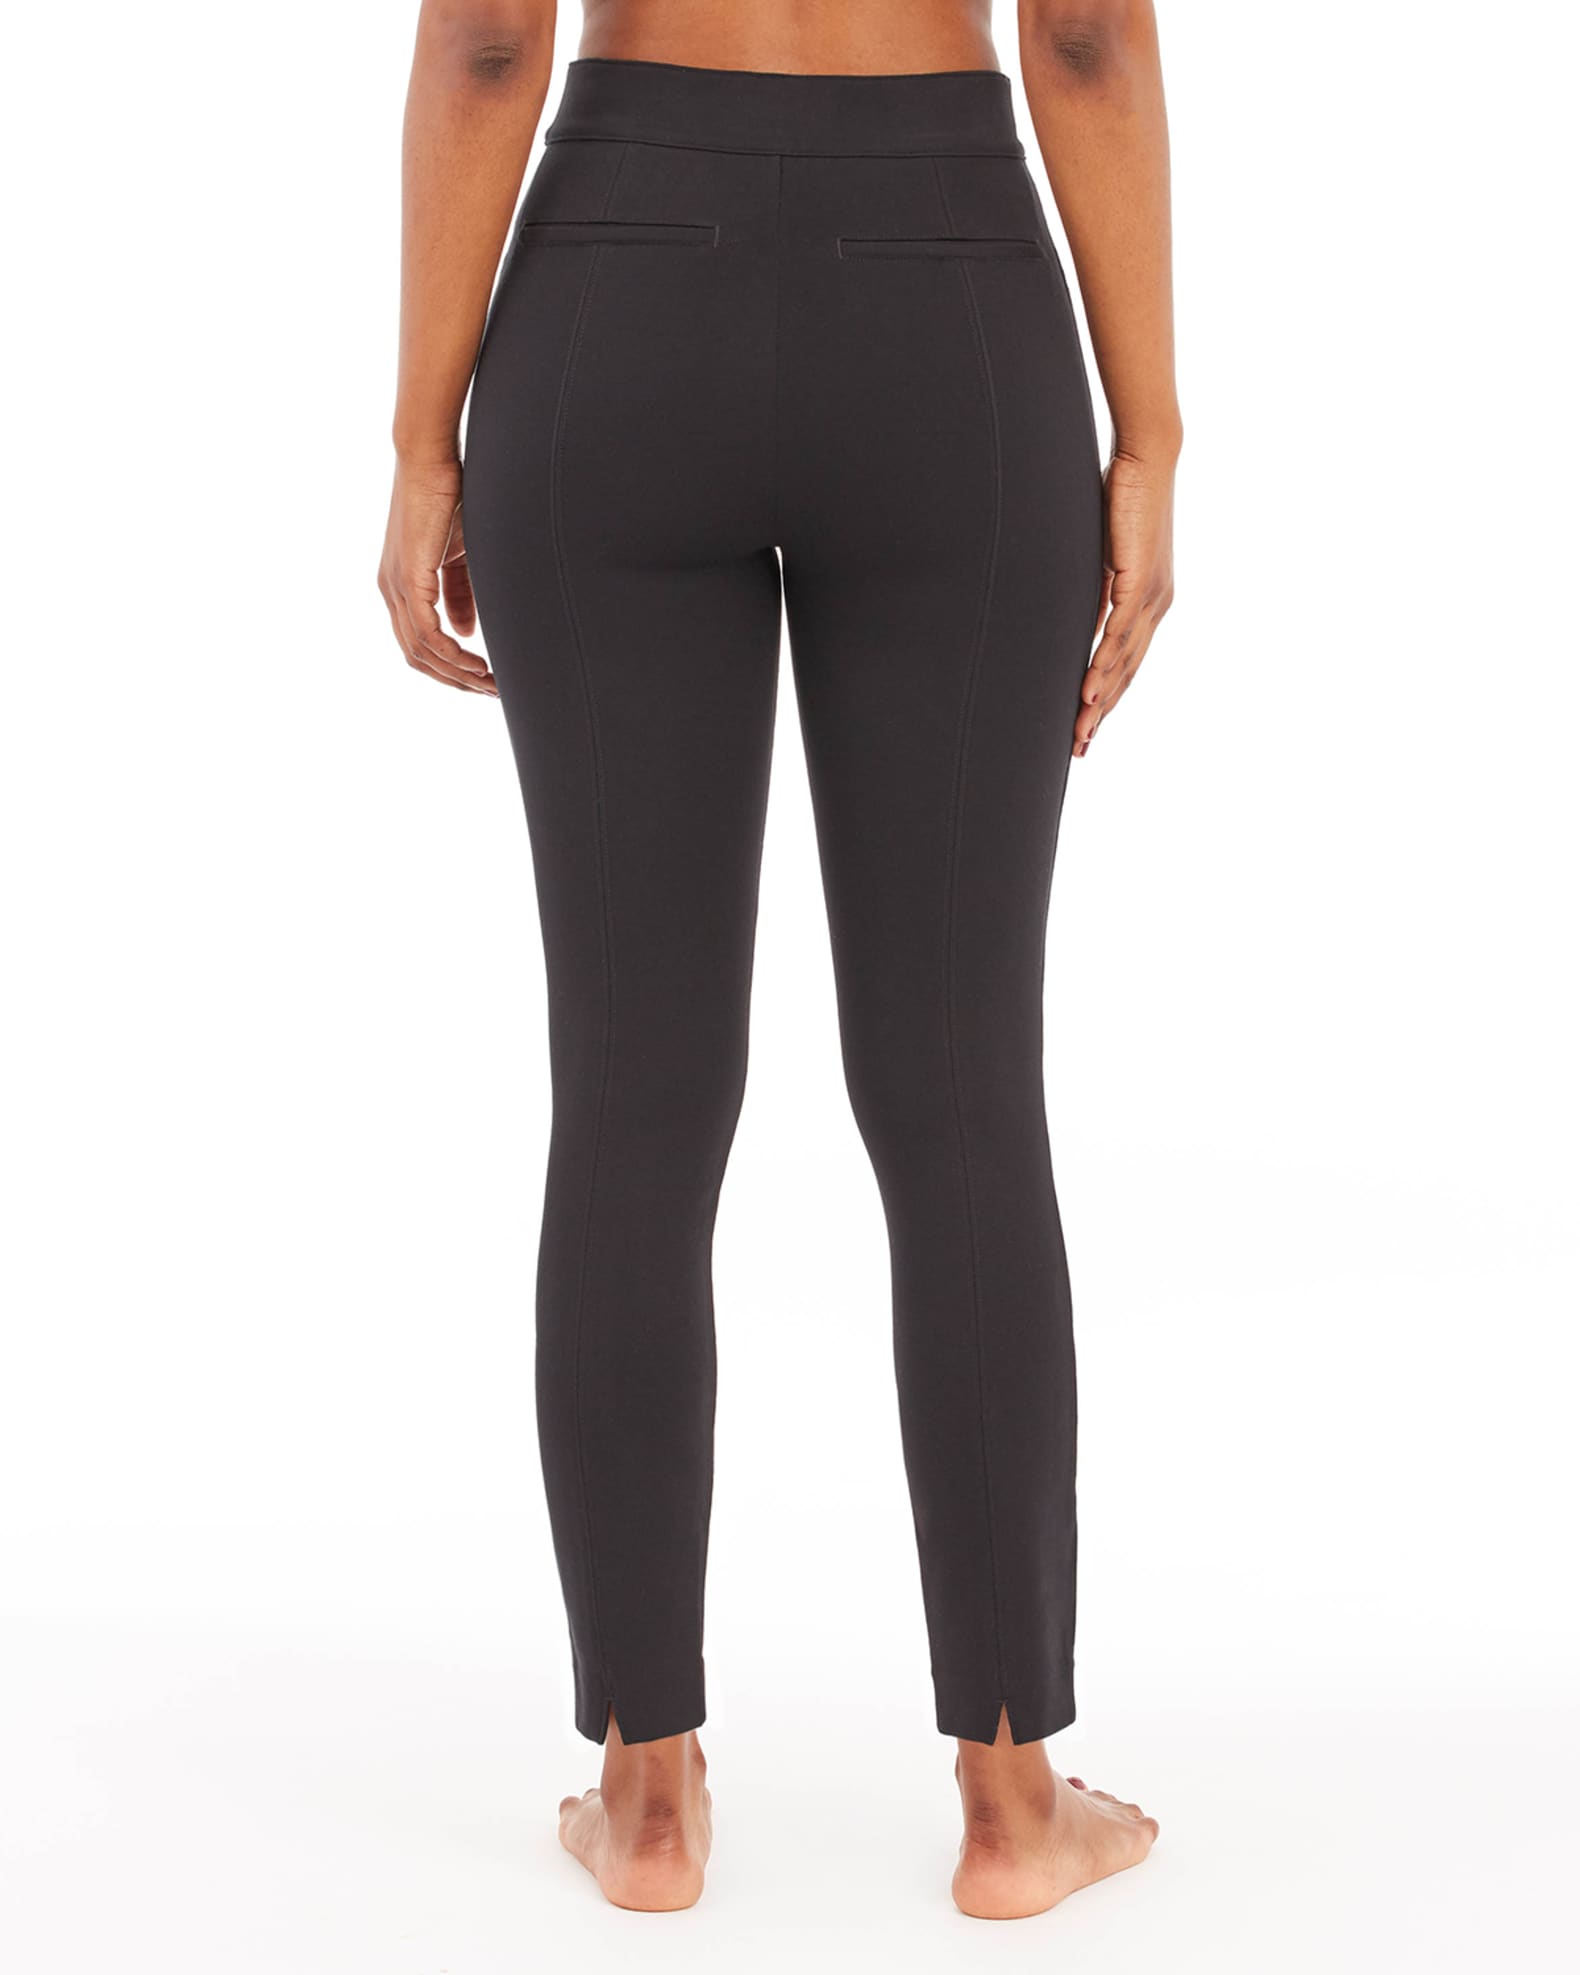 The Find: The Perfect Black Pant